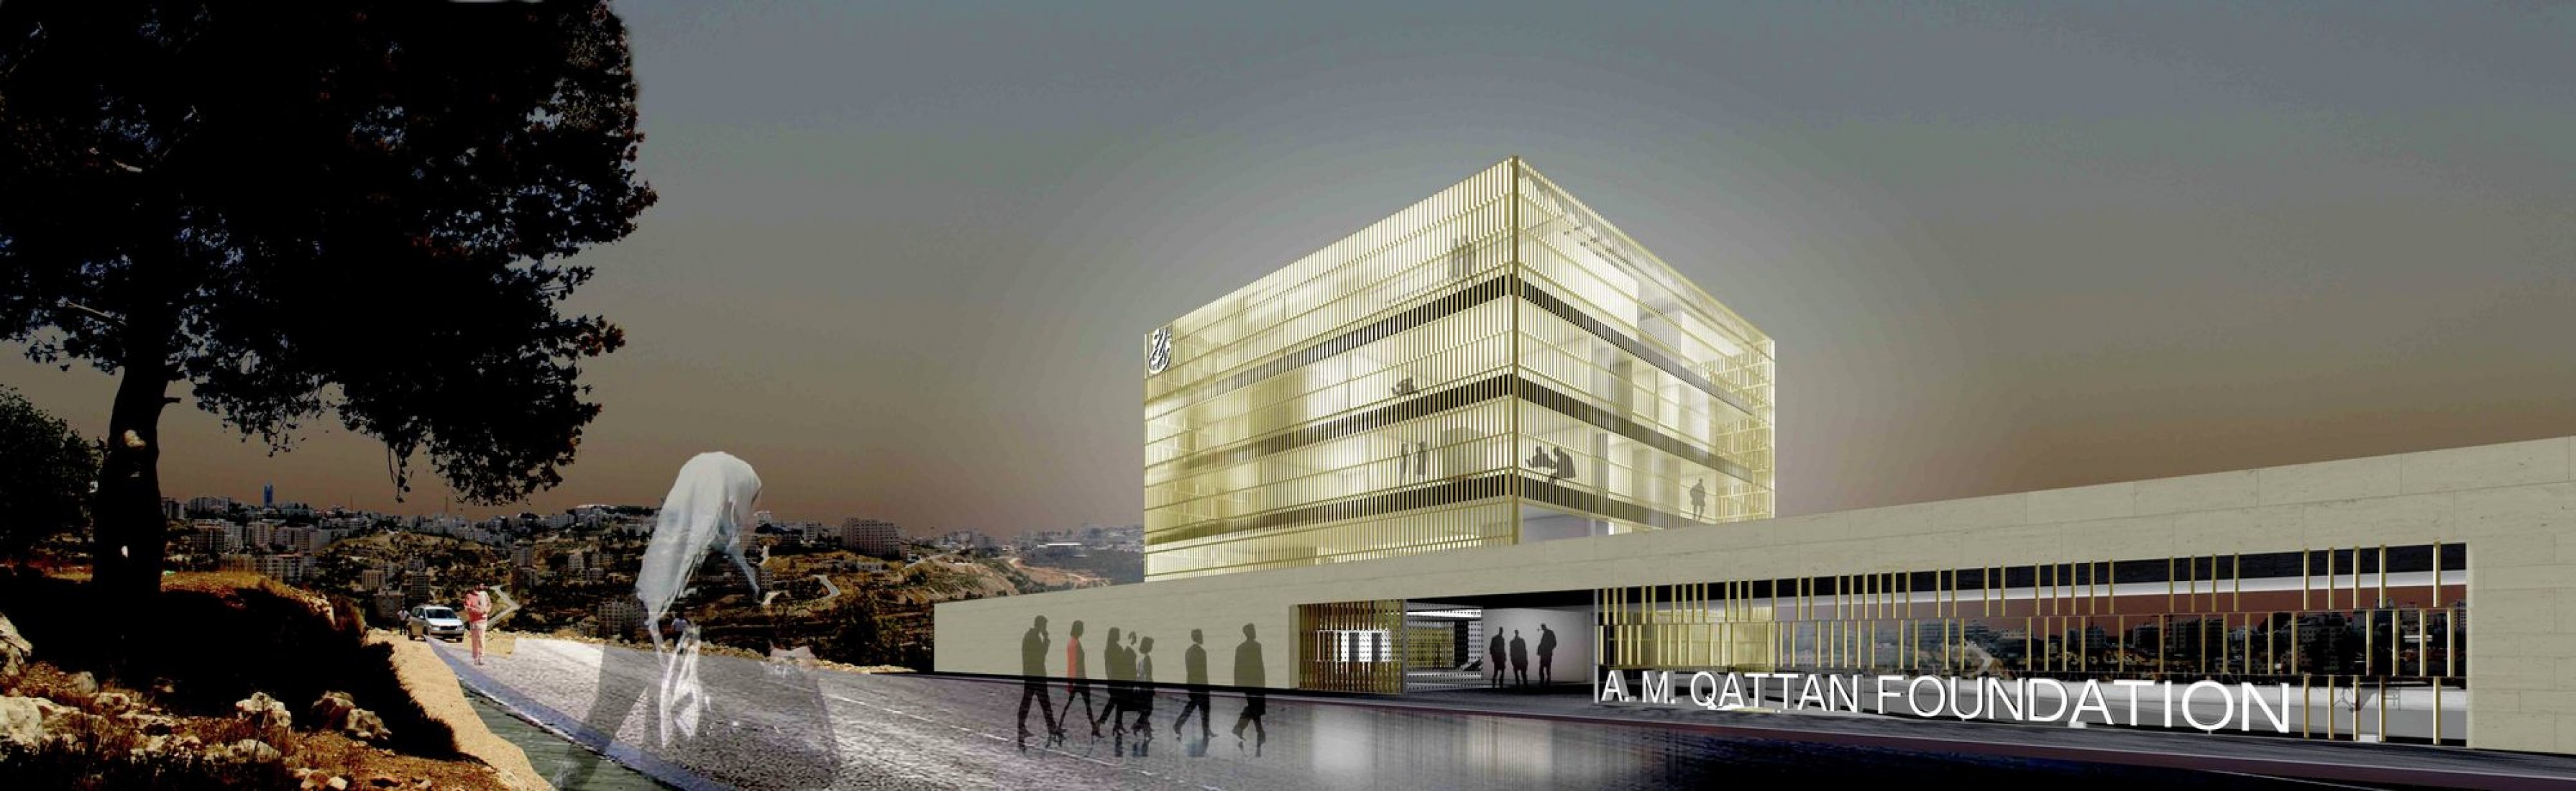 Render from outside, A.M. Qattan Foundation Building in Ramallah by Donaire Arquitectos.